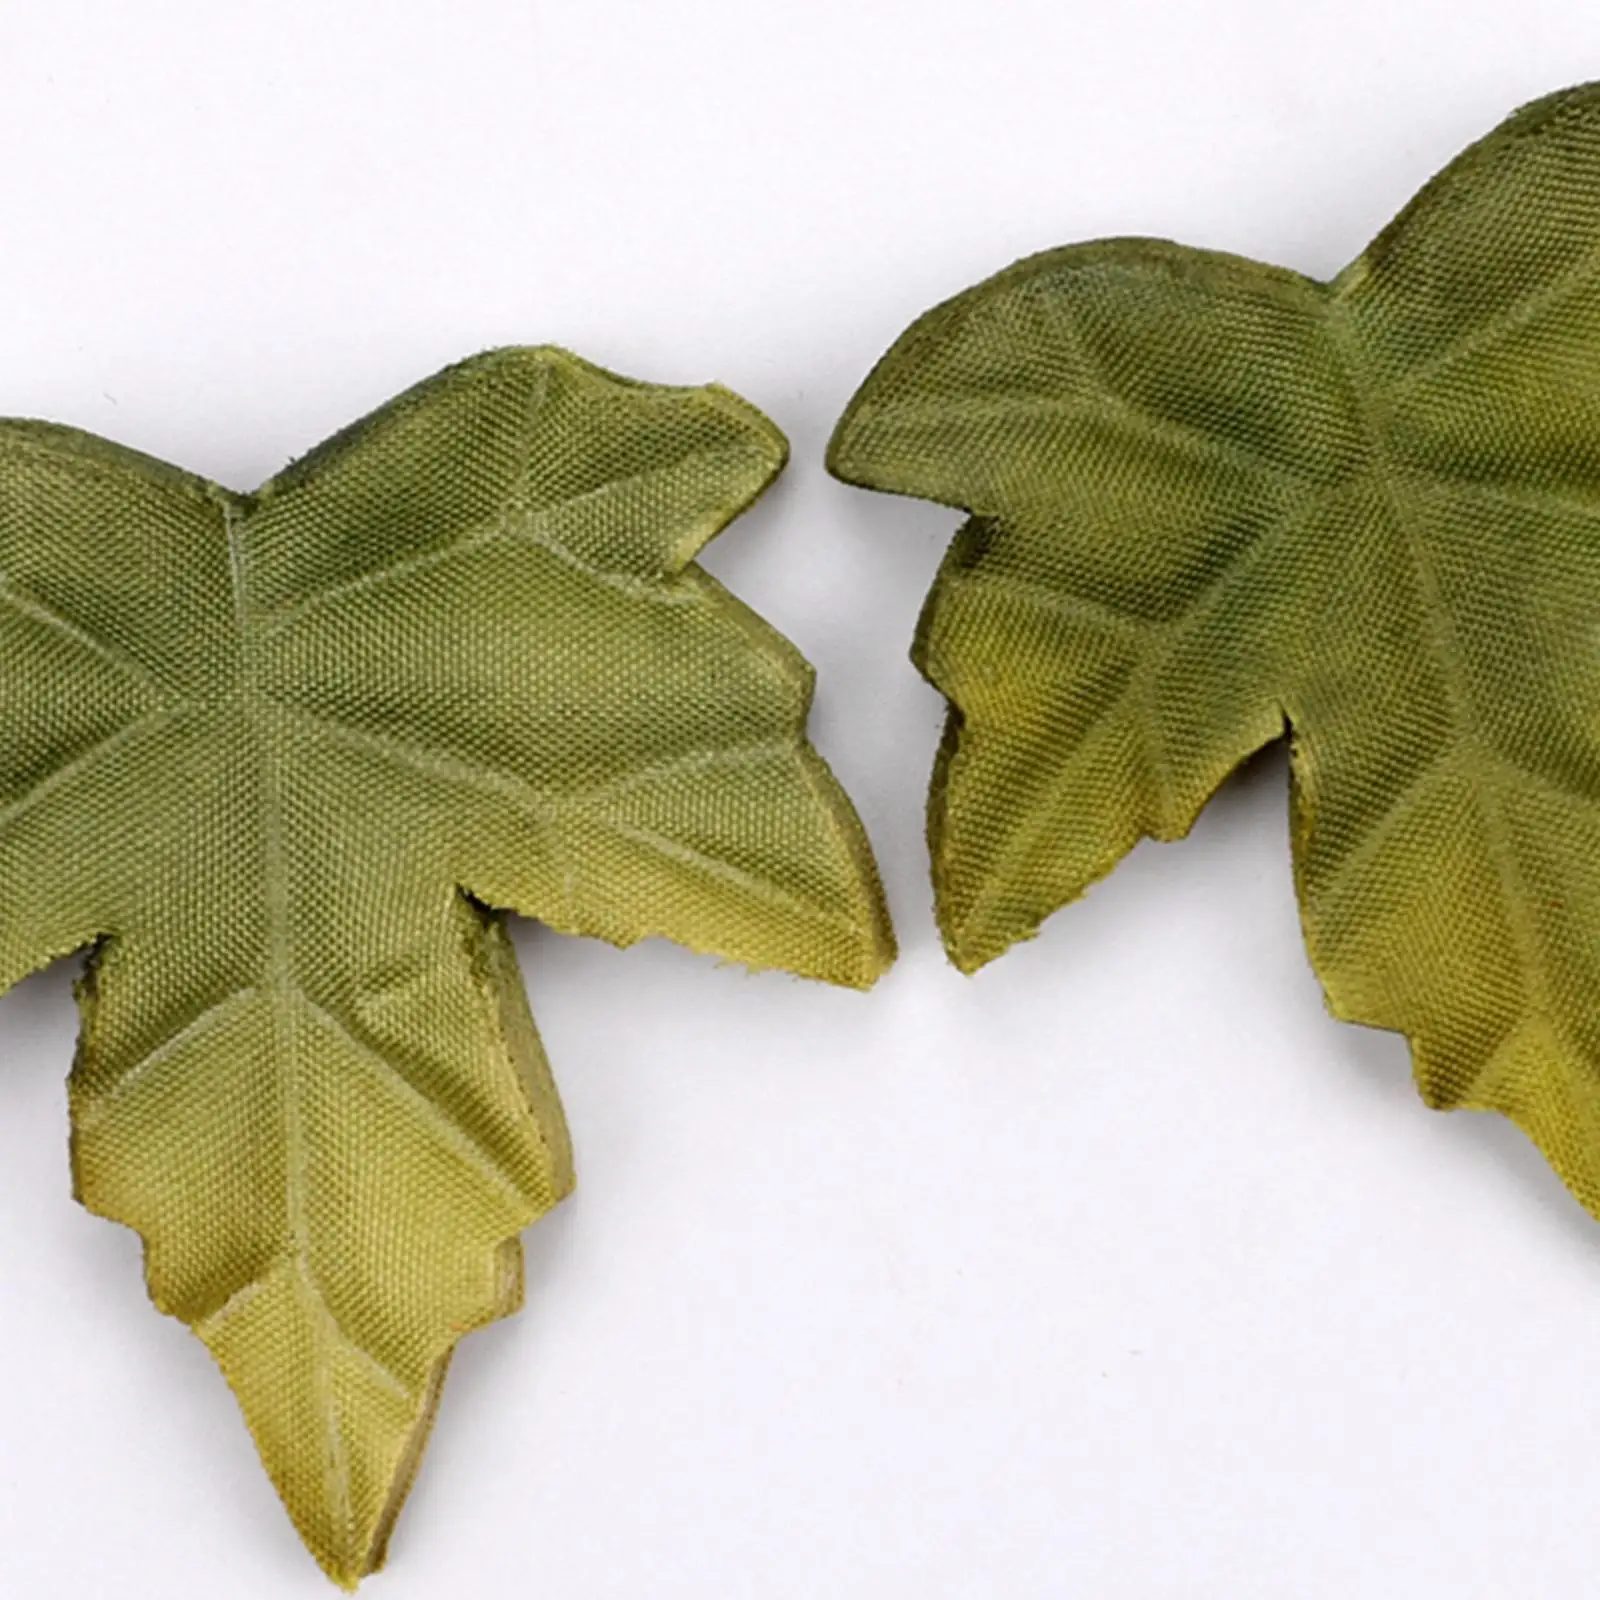 200 Pieces Artificial Maple Leaves Craft Supplies Decorative Maple Leaf for Floral Bouquet Party Home Office Dinner Table Wreath